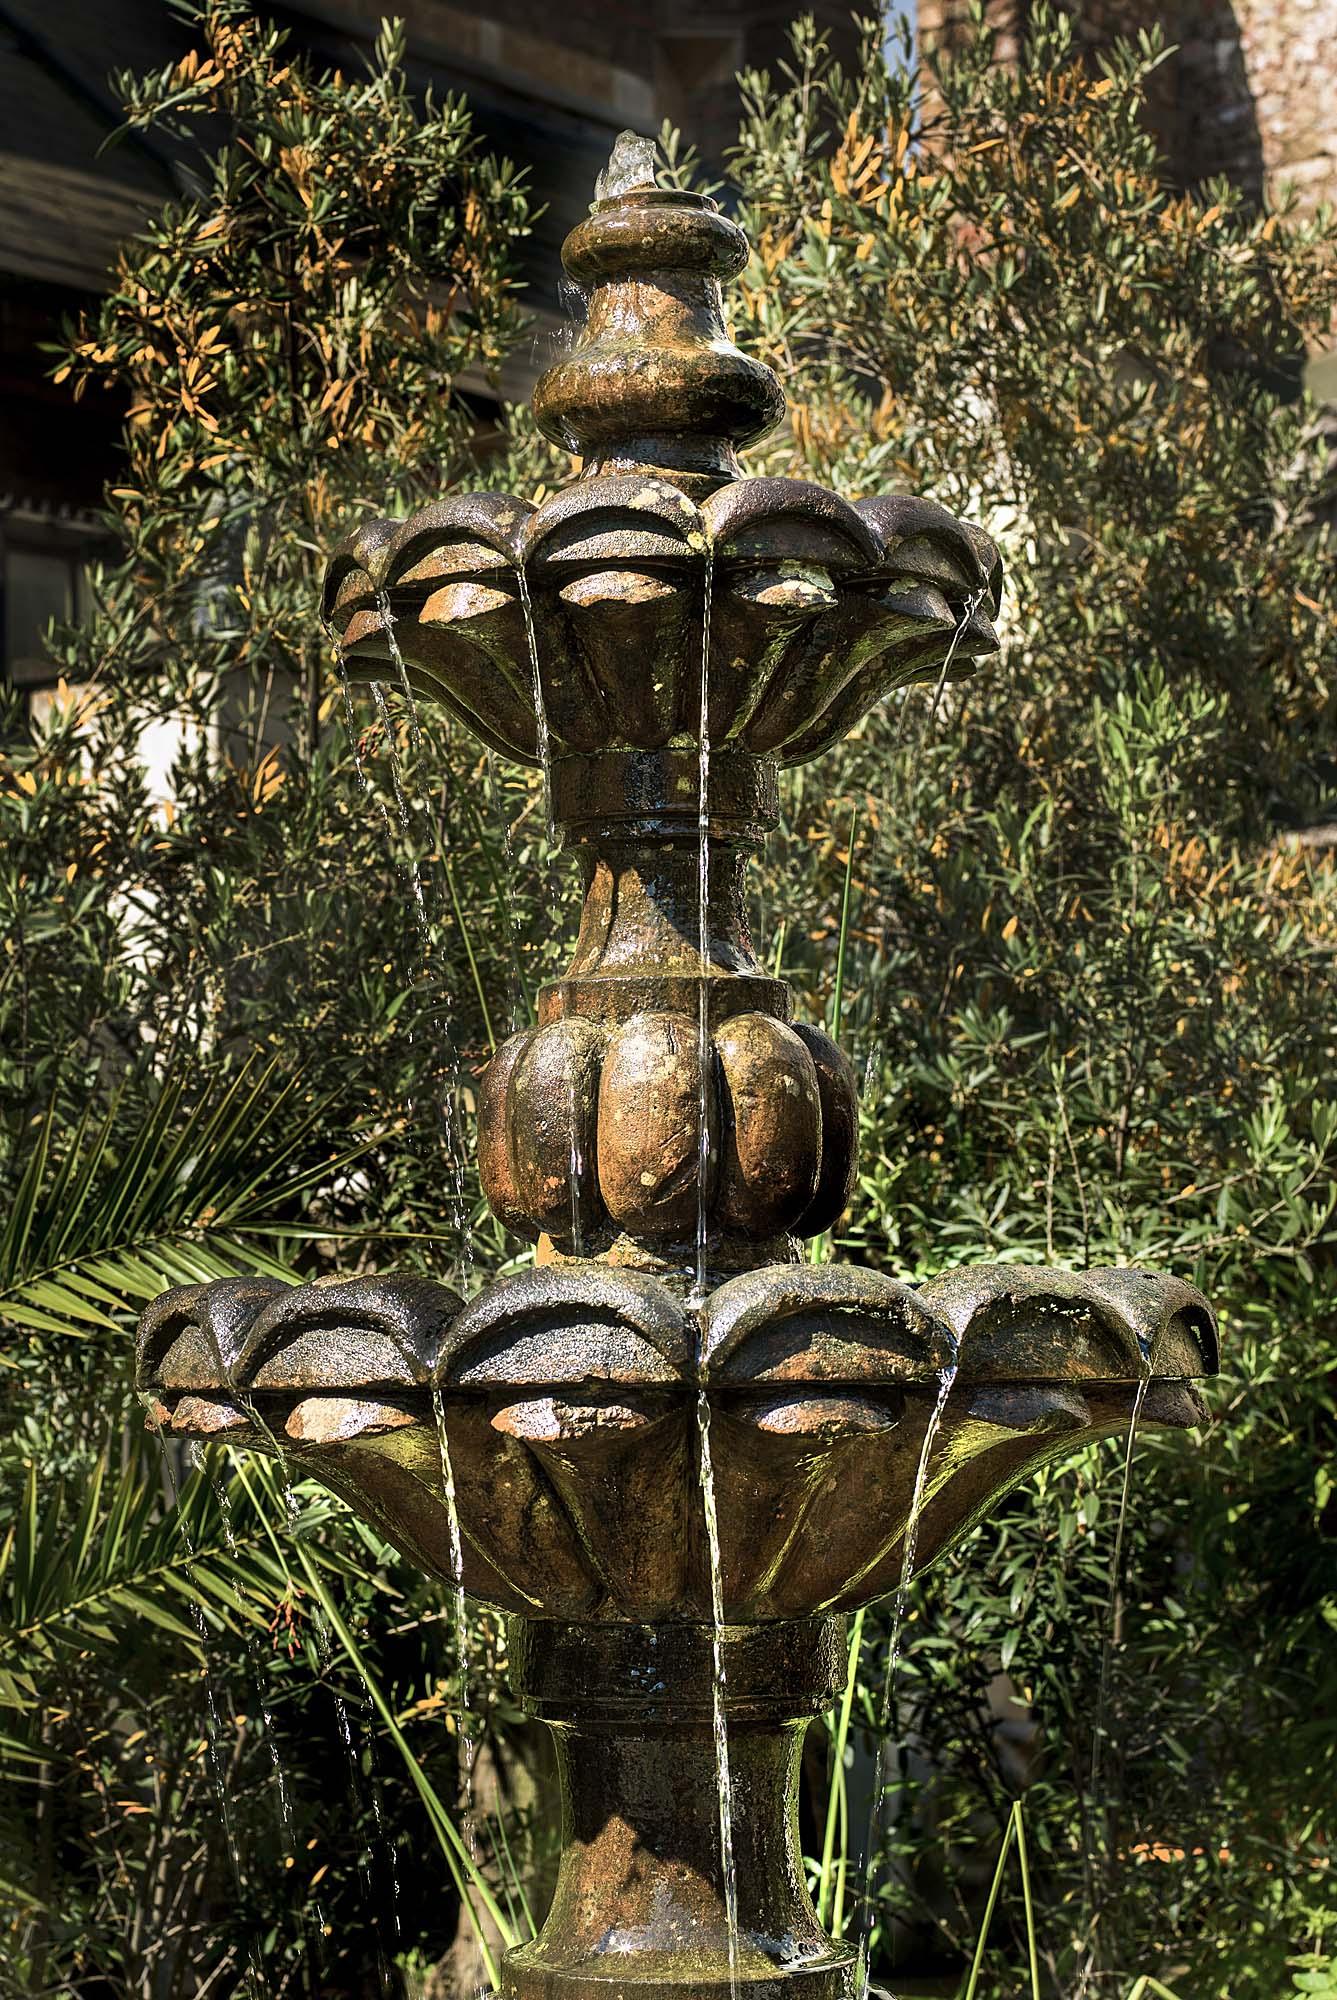 A rather fine Baroque style three-tier garden fountain carved in patinated Doddington Sandstone. The three strongly carved ascending bowls each rest on ornate and sturdy baluster stems. As the water flows the air is filled with the soothing and